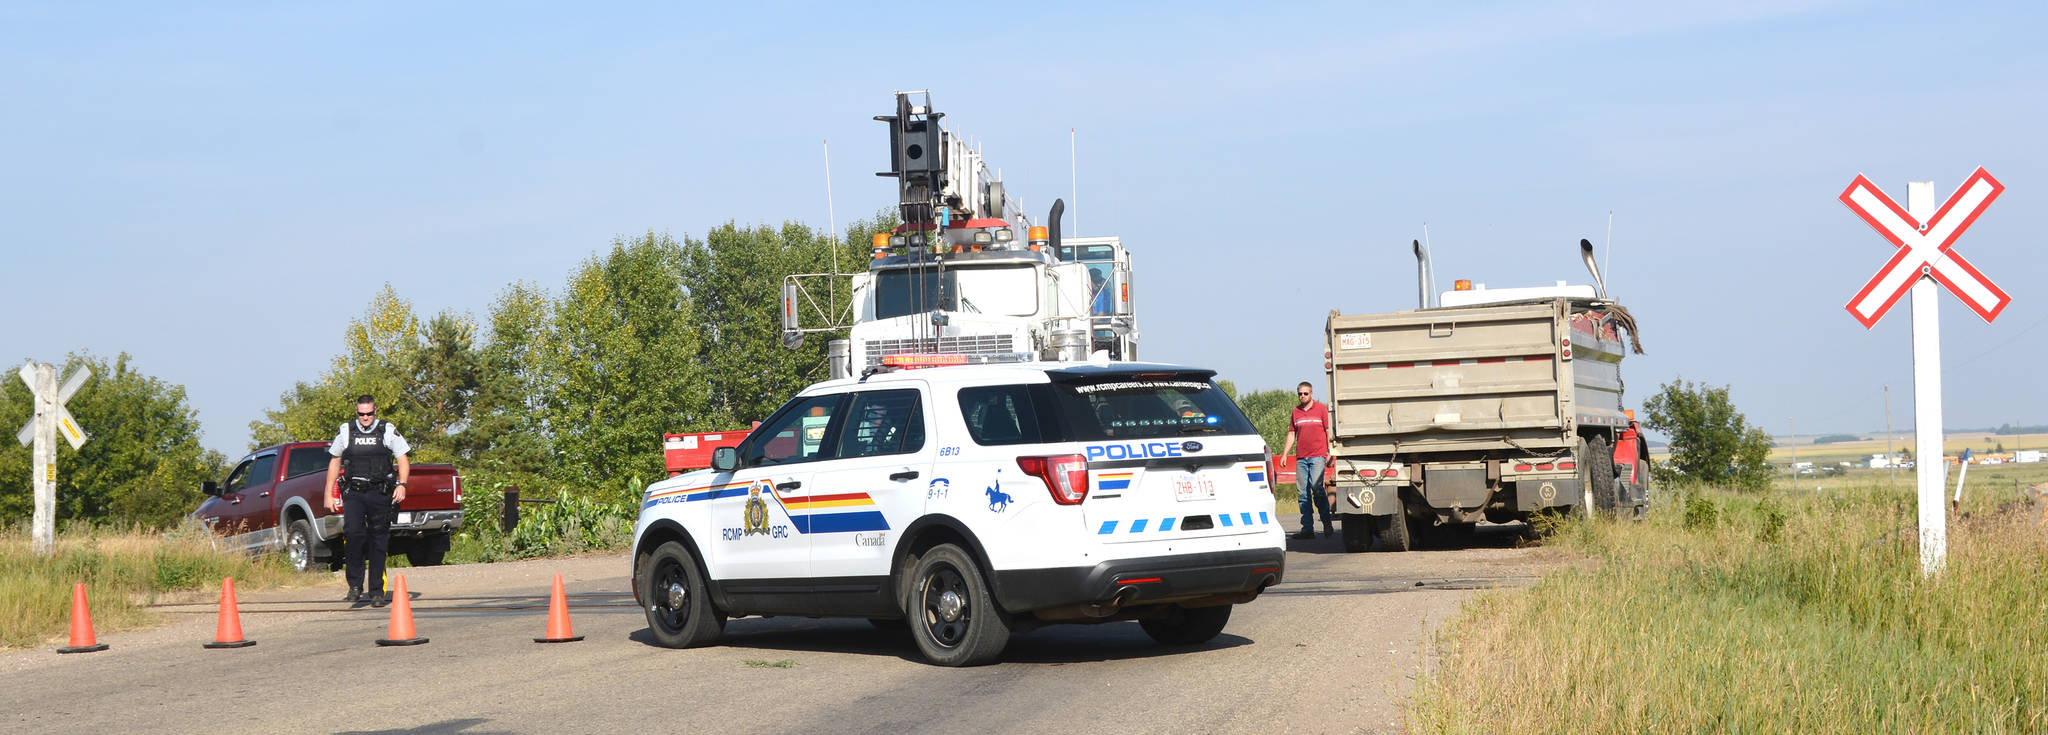 Clean up is underway at a railway crossing east of Stettler near the transfer site after a train and truck collided. According to RCMP at the scene, there were no injuries. No more details are available. (Lisa Joy/Black Press)